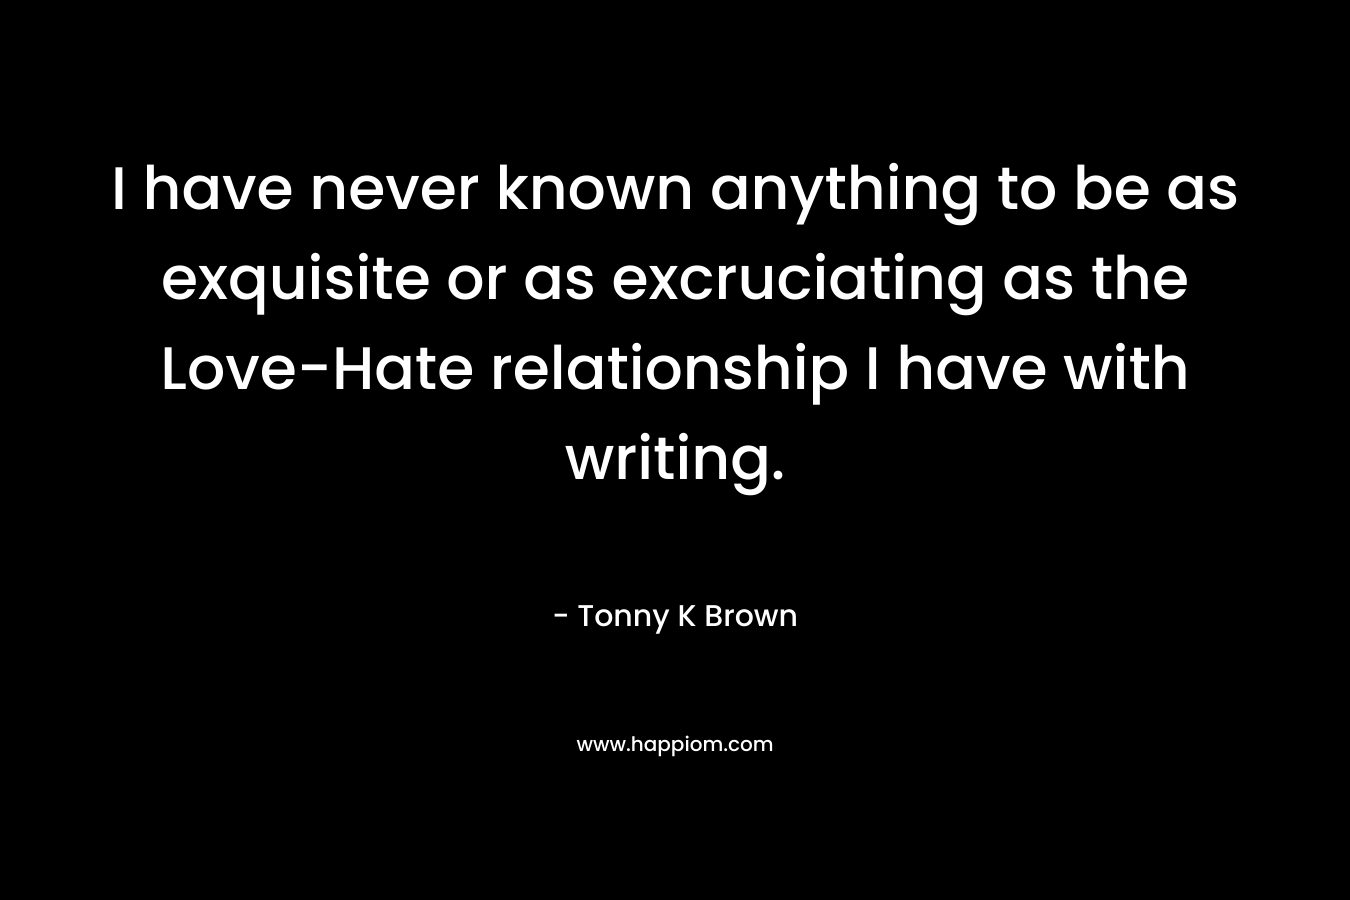 I have never known anything to be as exquisite or as excruciating as the Love-Hate relationship I have with writing. – Tonny K Brown